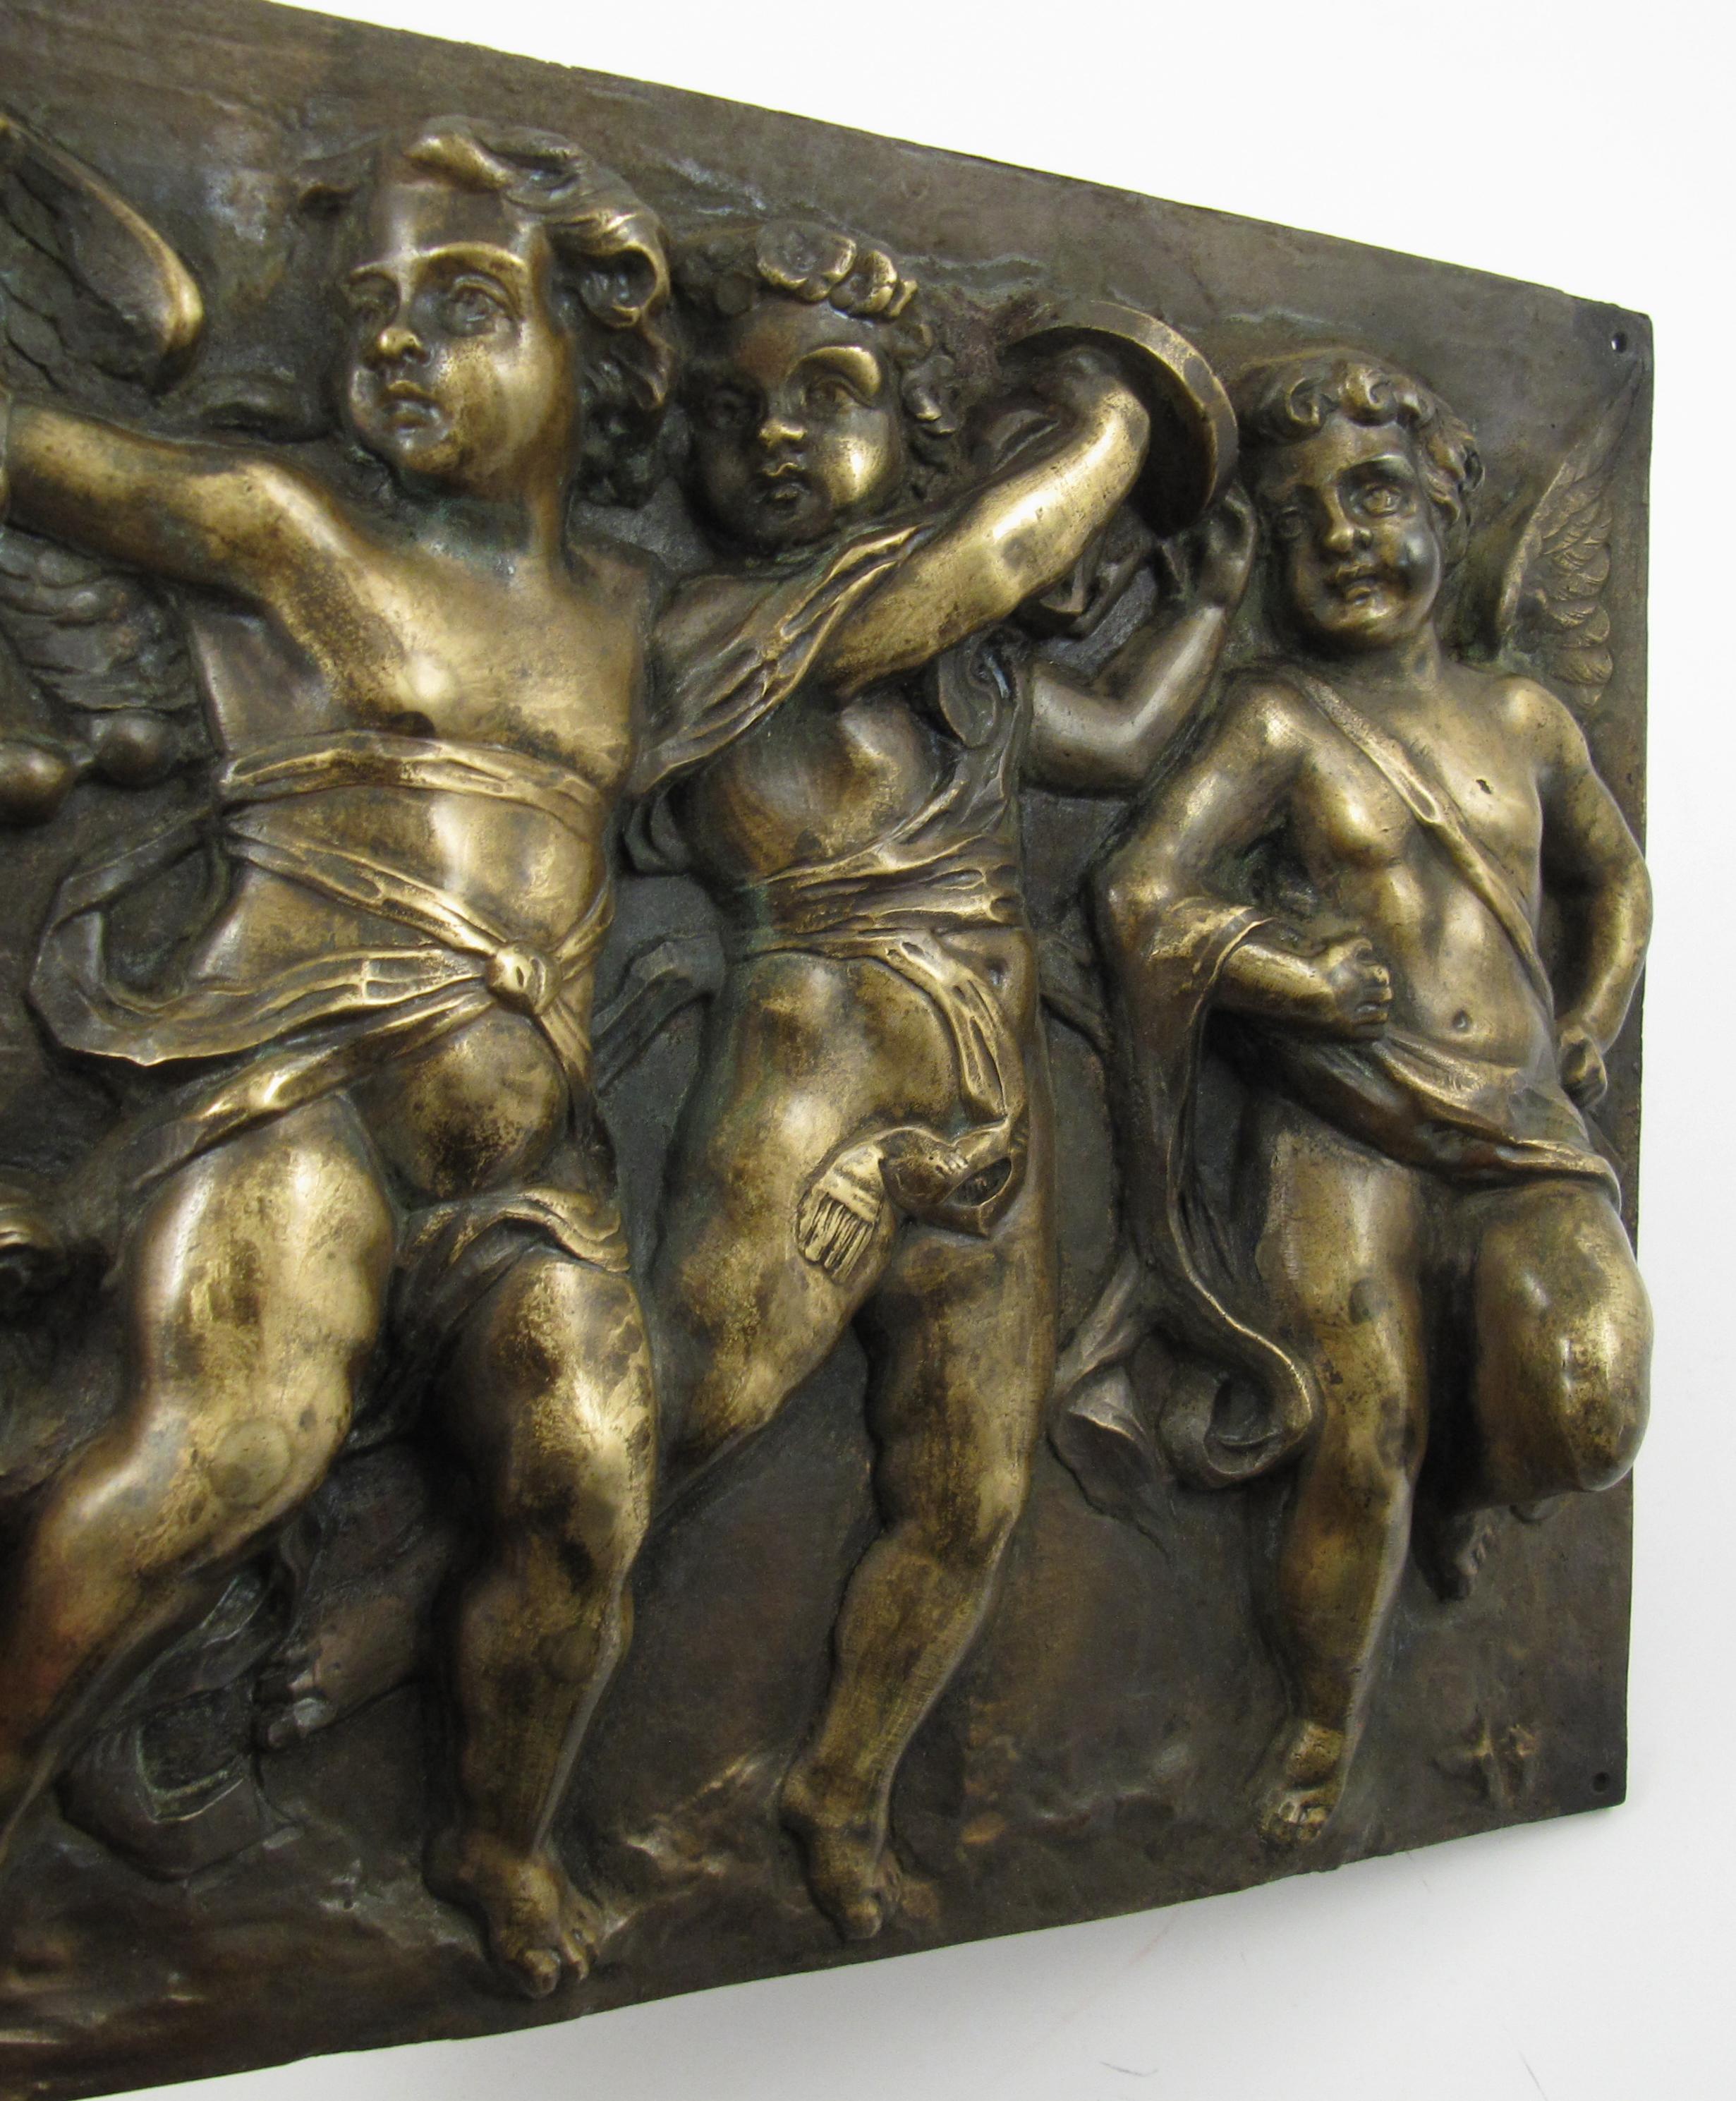 Music Making Dancing Putti – 19thC France - High Relief Bronze Plaque - Rococo Sculpture by Claude Michel Clodion